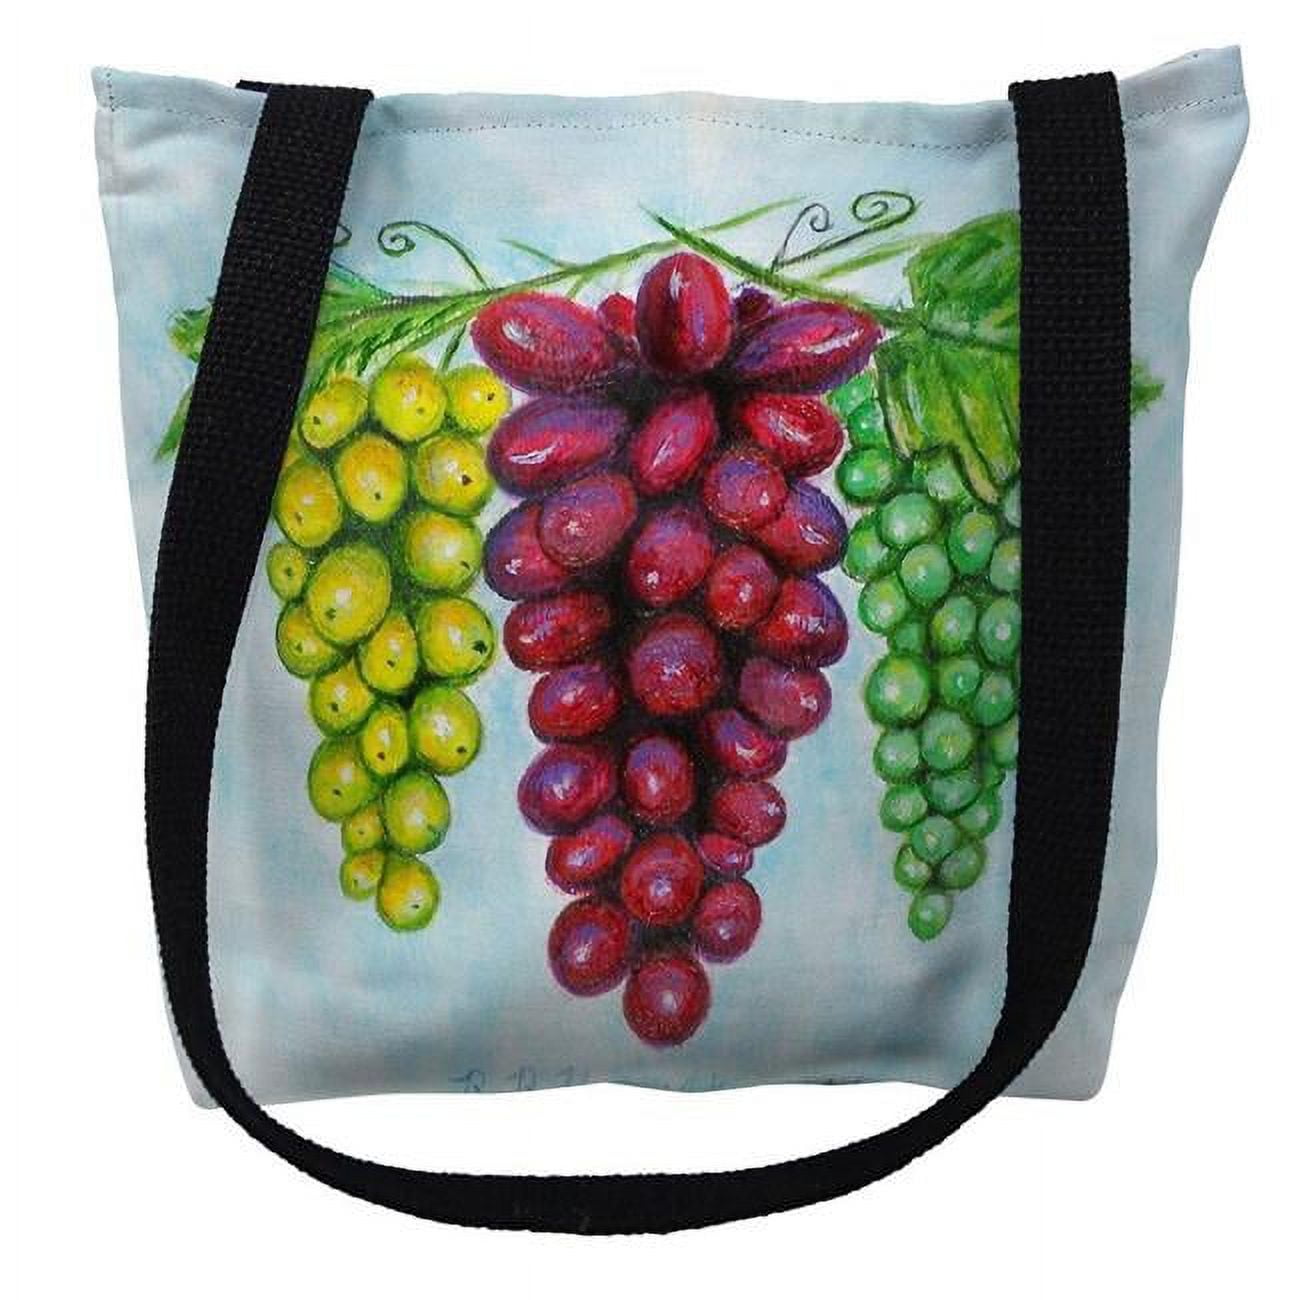 Ty041m 16 X 16 In. Bunches Of Grapes Tote Bag - Medium